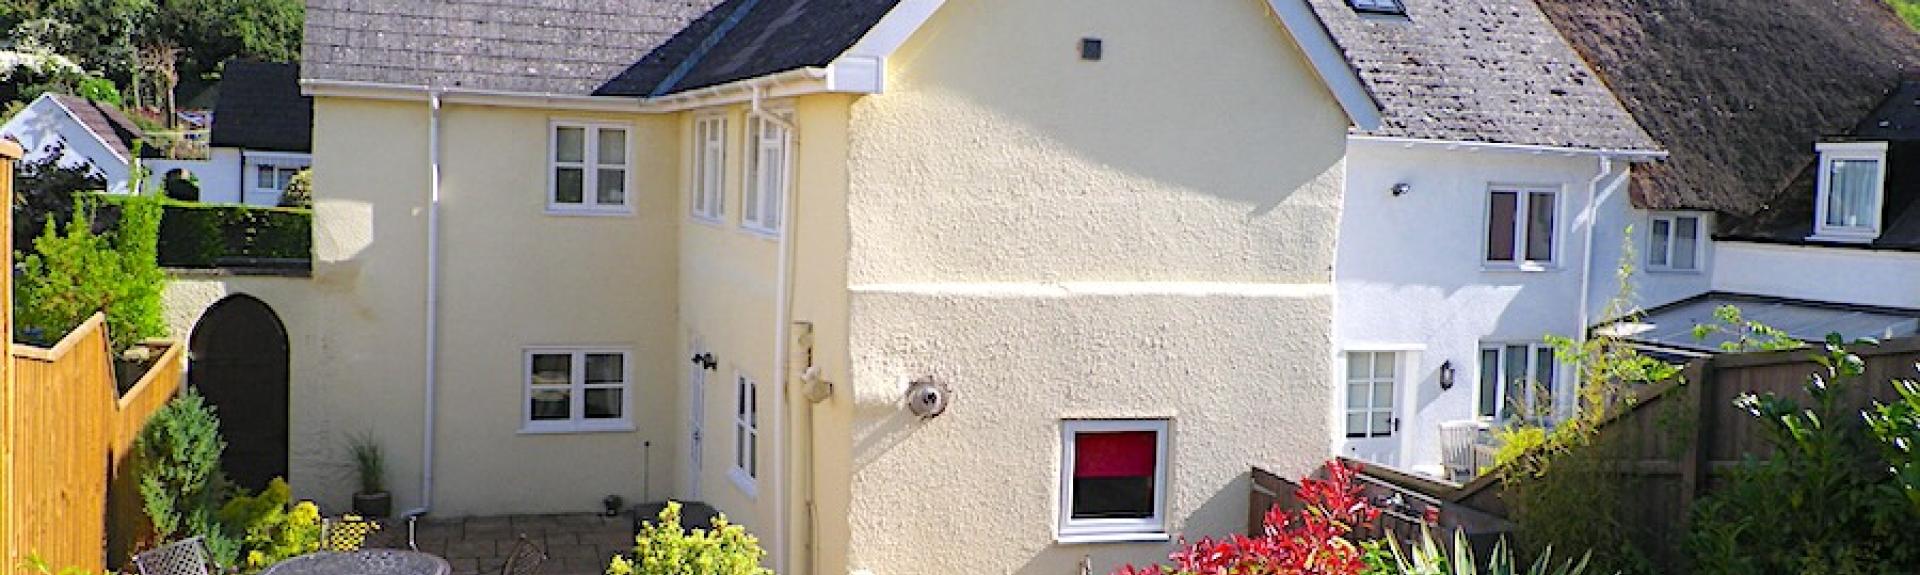 Exterior of a Devon village cottage with a patio and a well-kept garden.